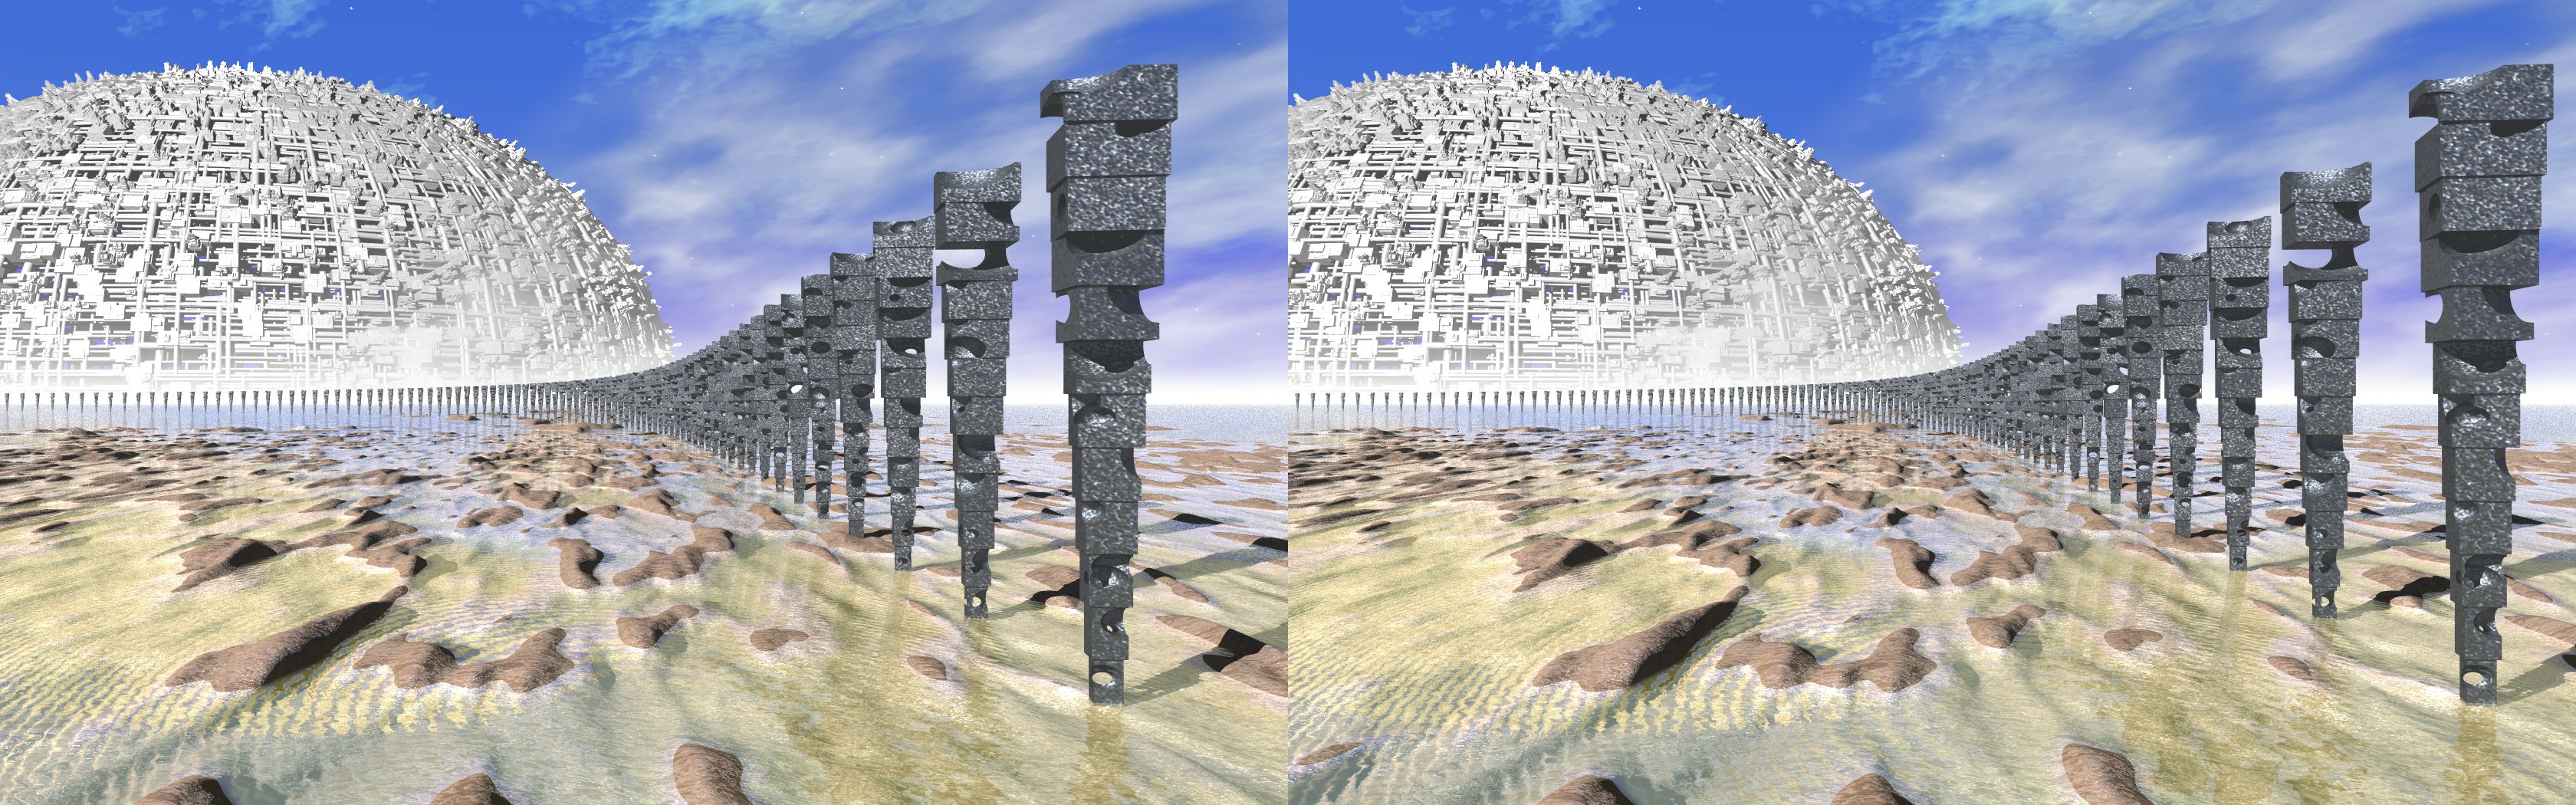 Shallow Water Poles - 3D stereo JPS image